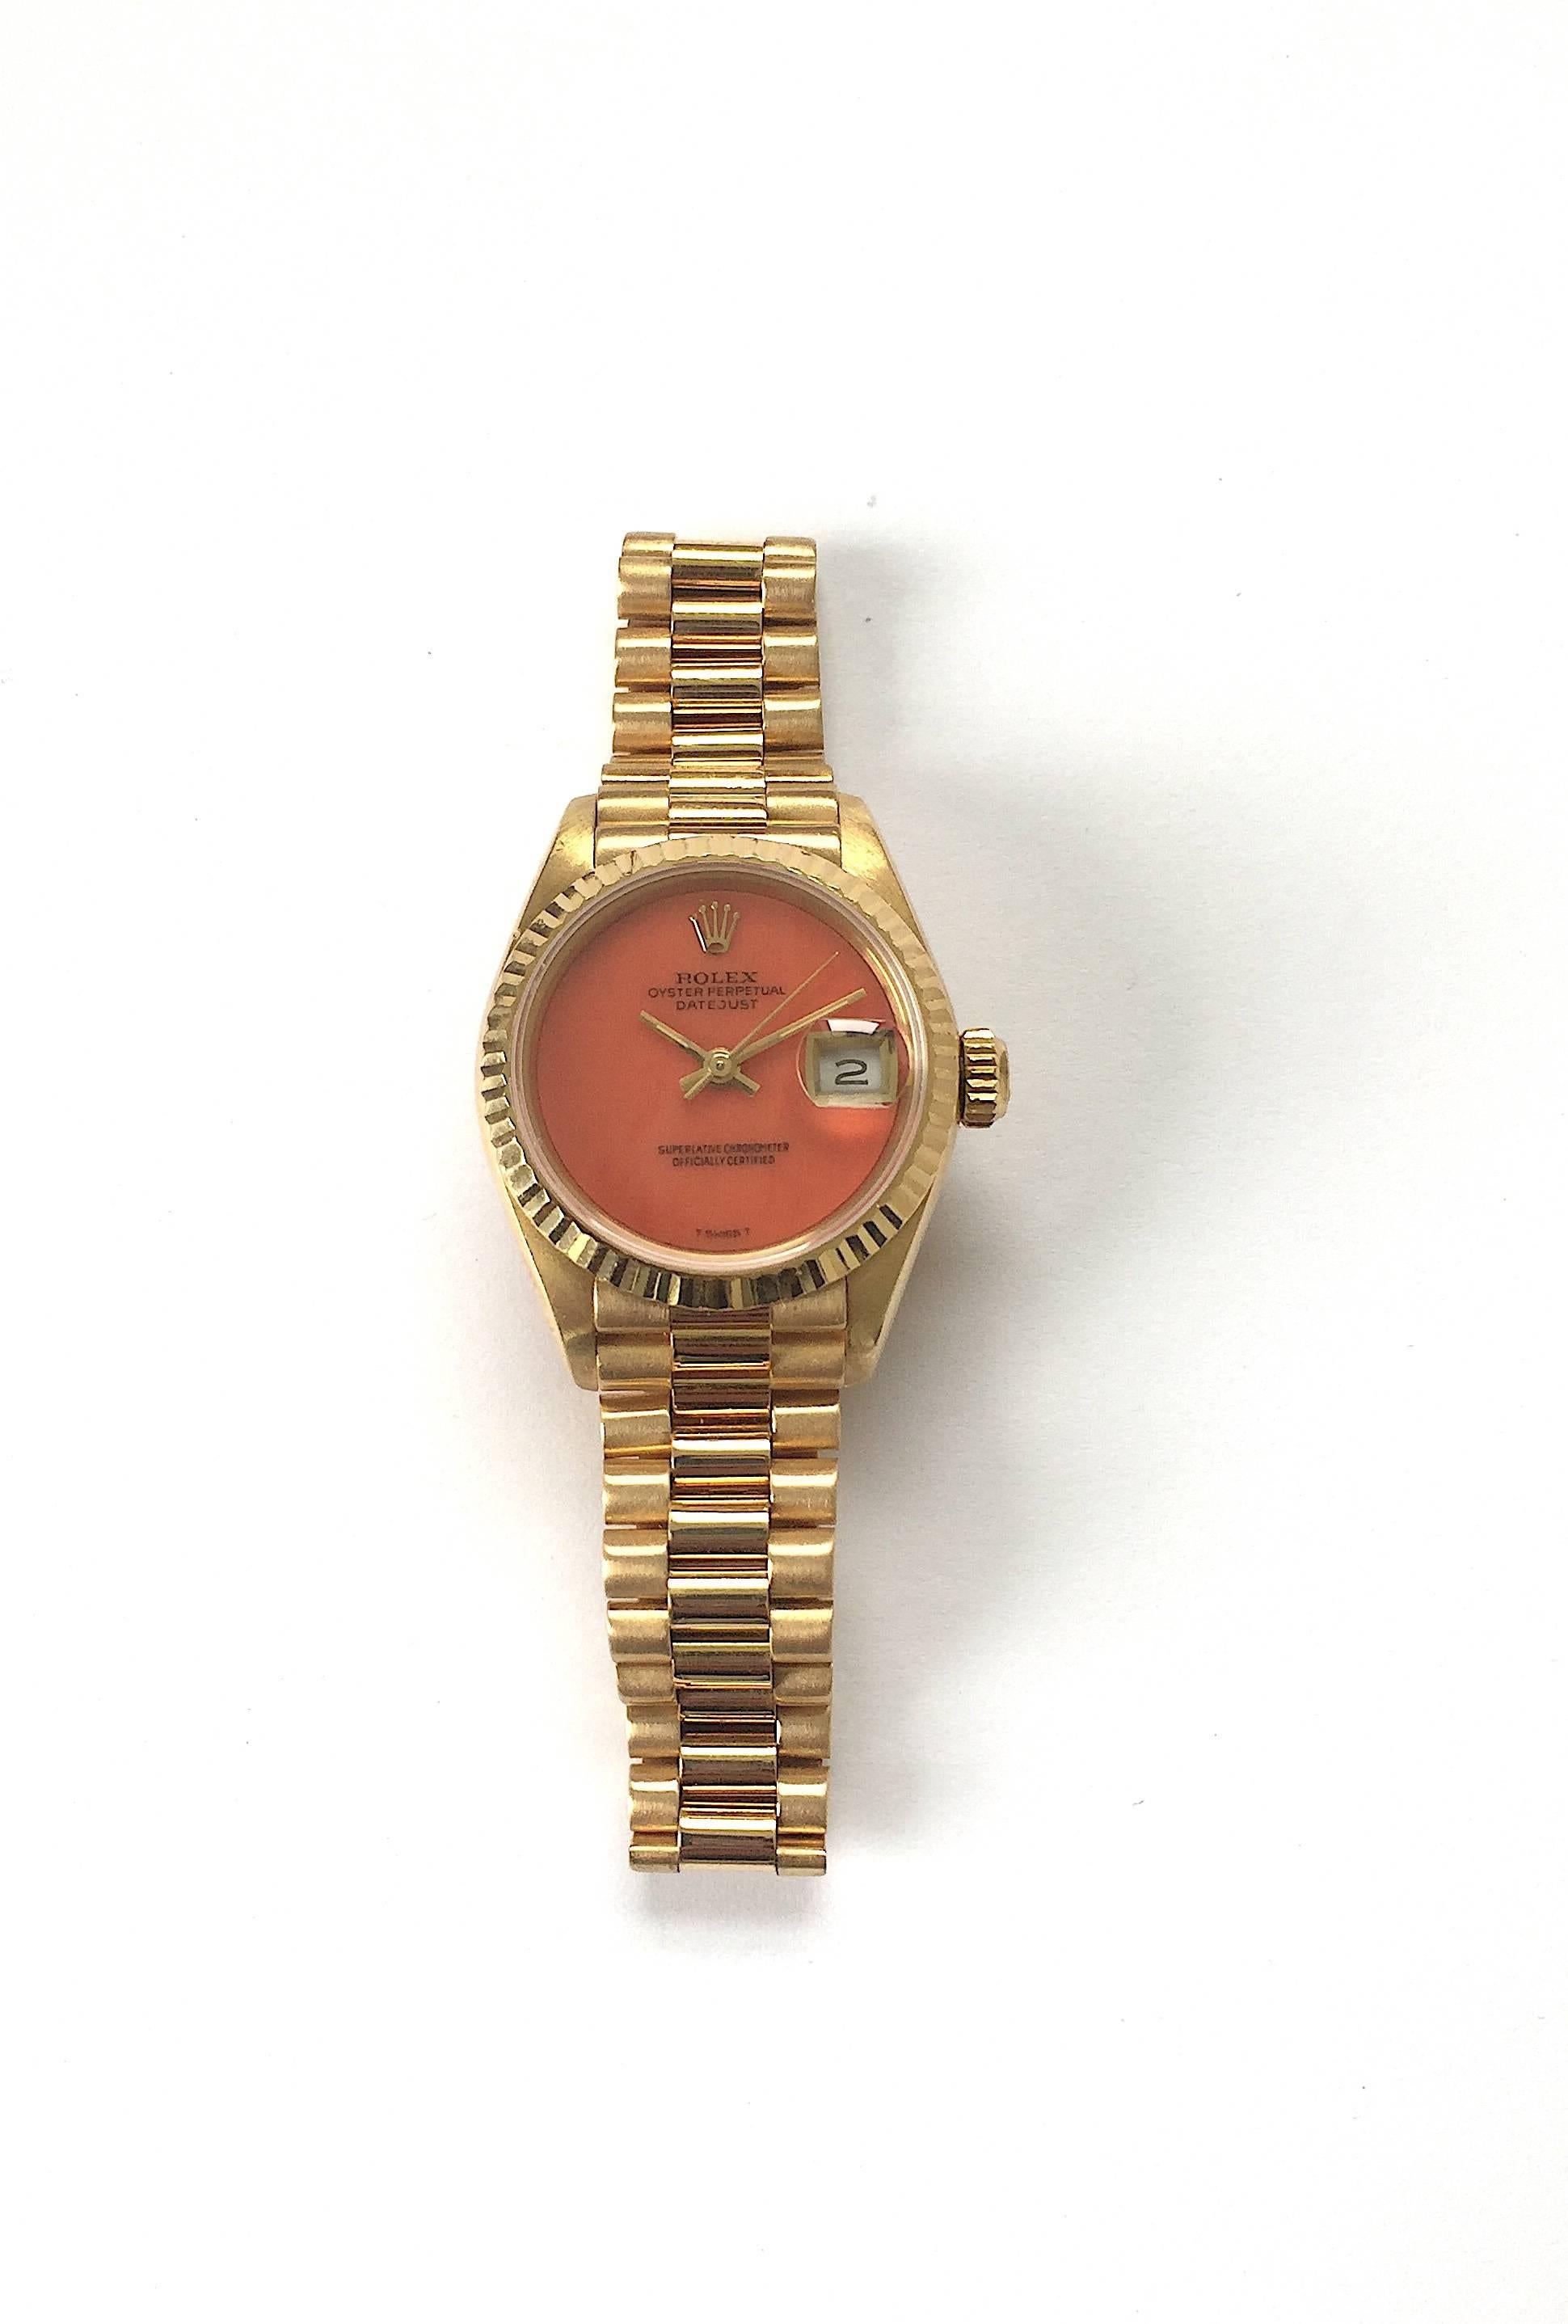 Rolex 18K Yellow Gold Ladies Datejust Watch 
Rare Factory Coral Dial with Applied Rolex Logo
Yellow Gold Gold Fluted Bezel
18K Yellow Gold Case
26mm in size 
Features Rolex Automatic Movement with Quick-Set Date Function
Acrylic Crystal
From Late